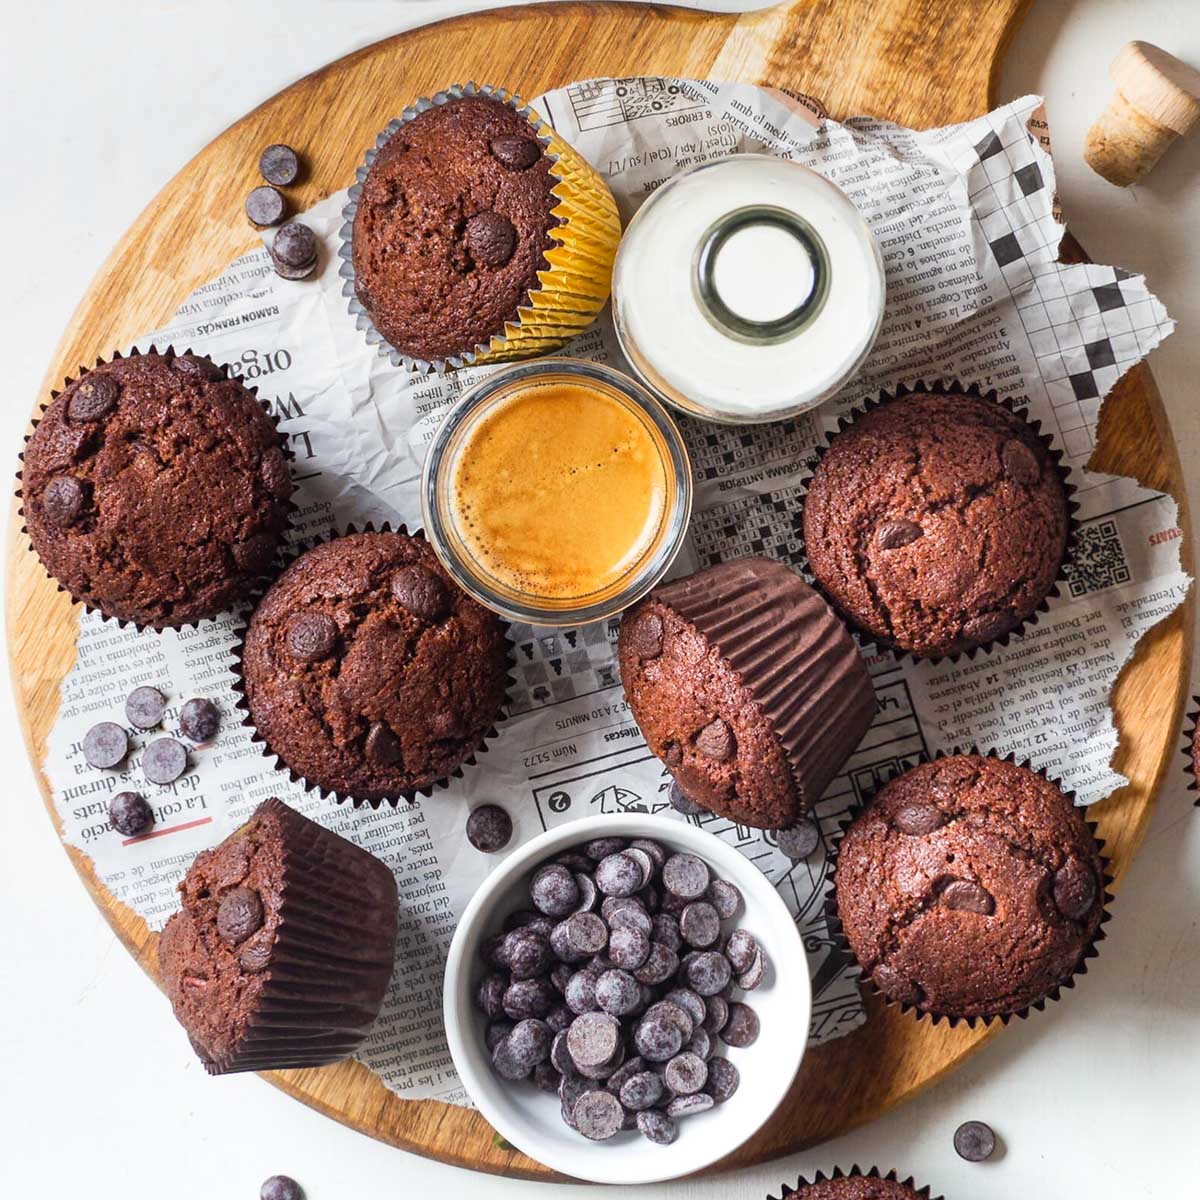 muffins on a wooden board with a bottle of plant milk, espresso and chocolate chips